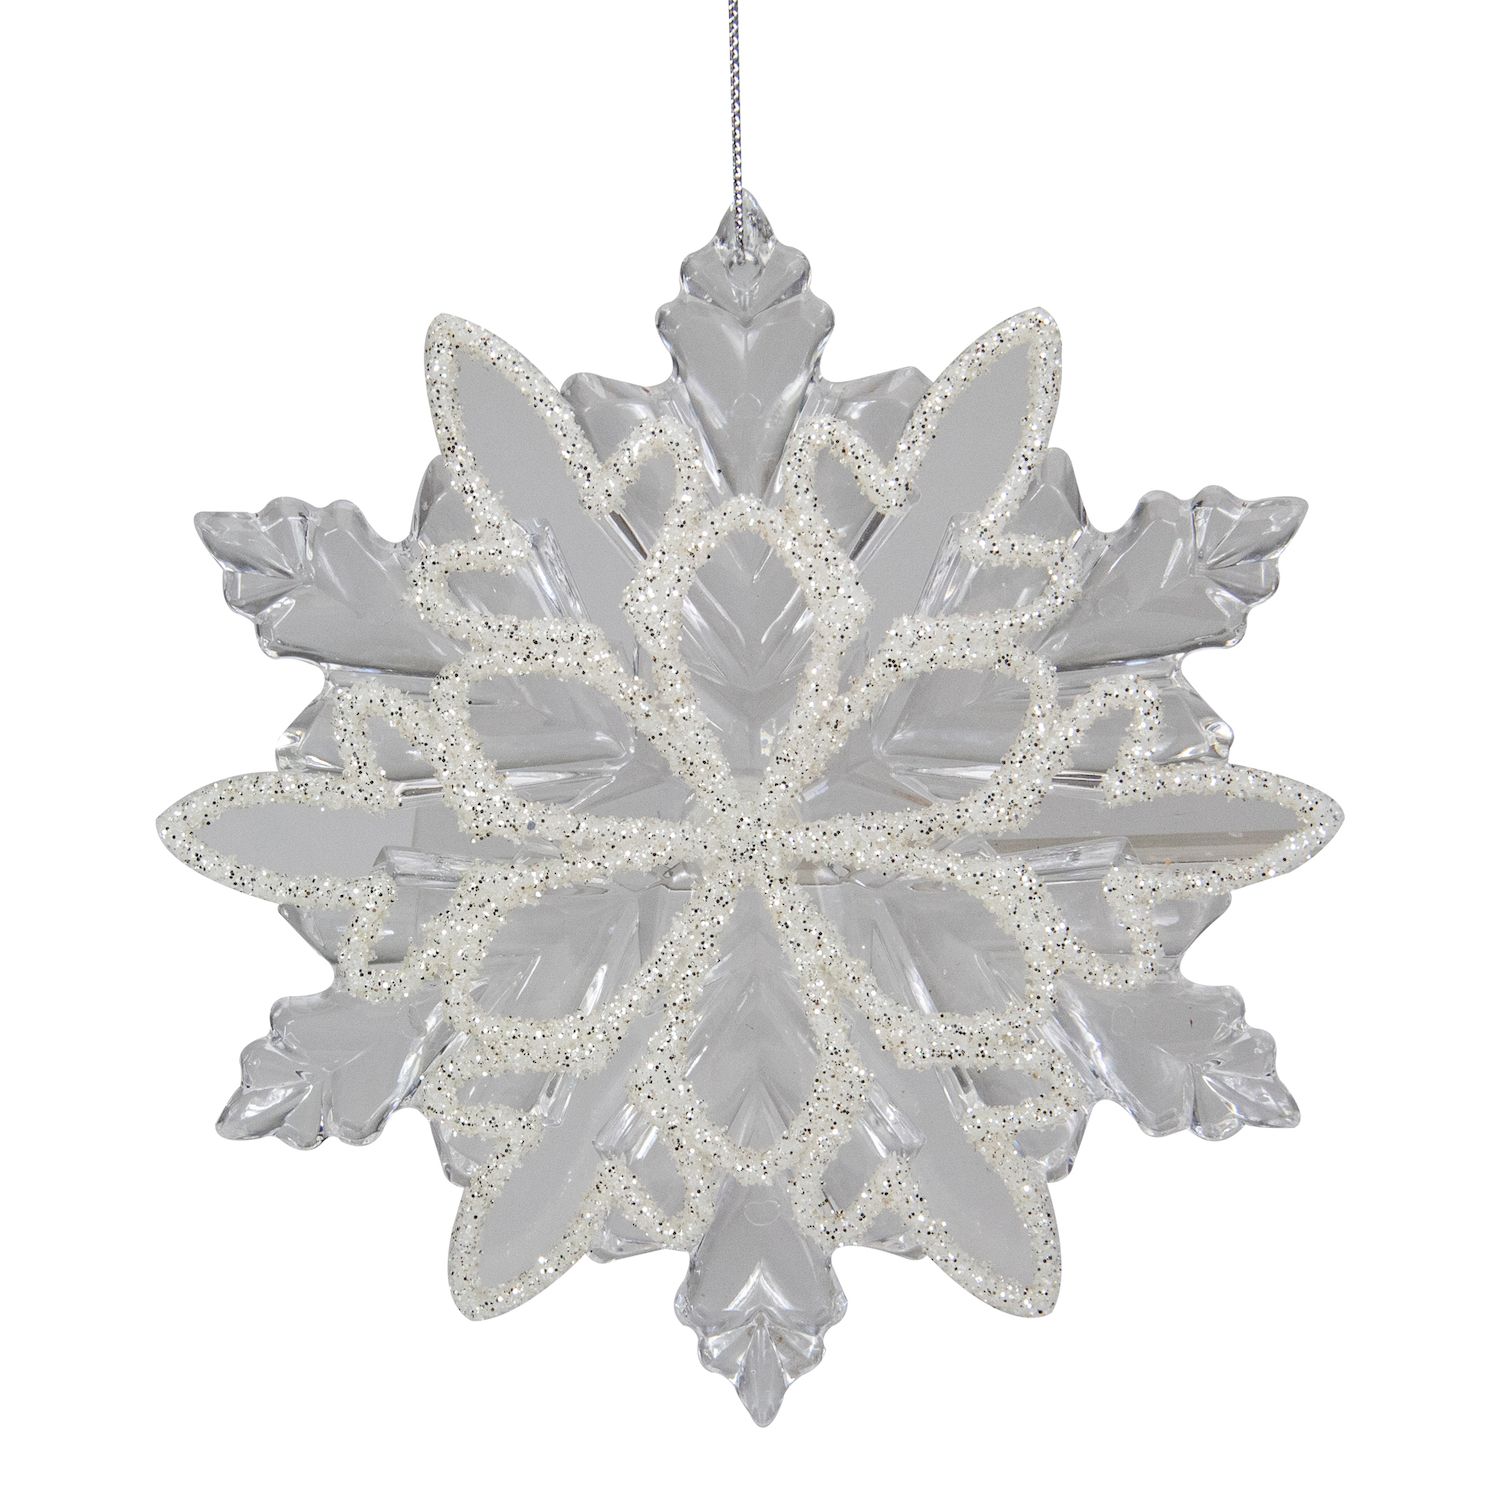 Acrylic Silver Glitter Snowflake Christmas Ornaments - Set of 12 Assorted  Styles of Snowflakes - Holiday Snowflake Decorations